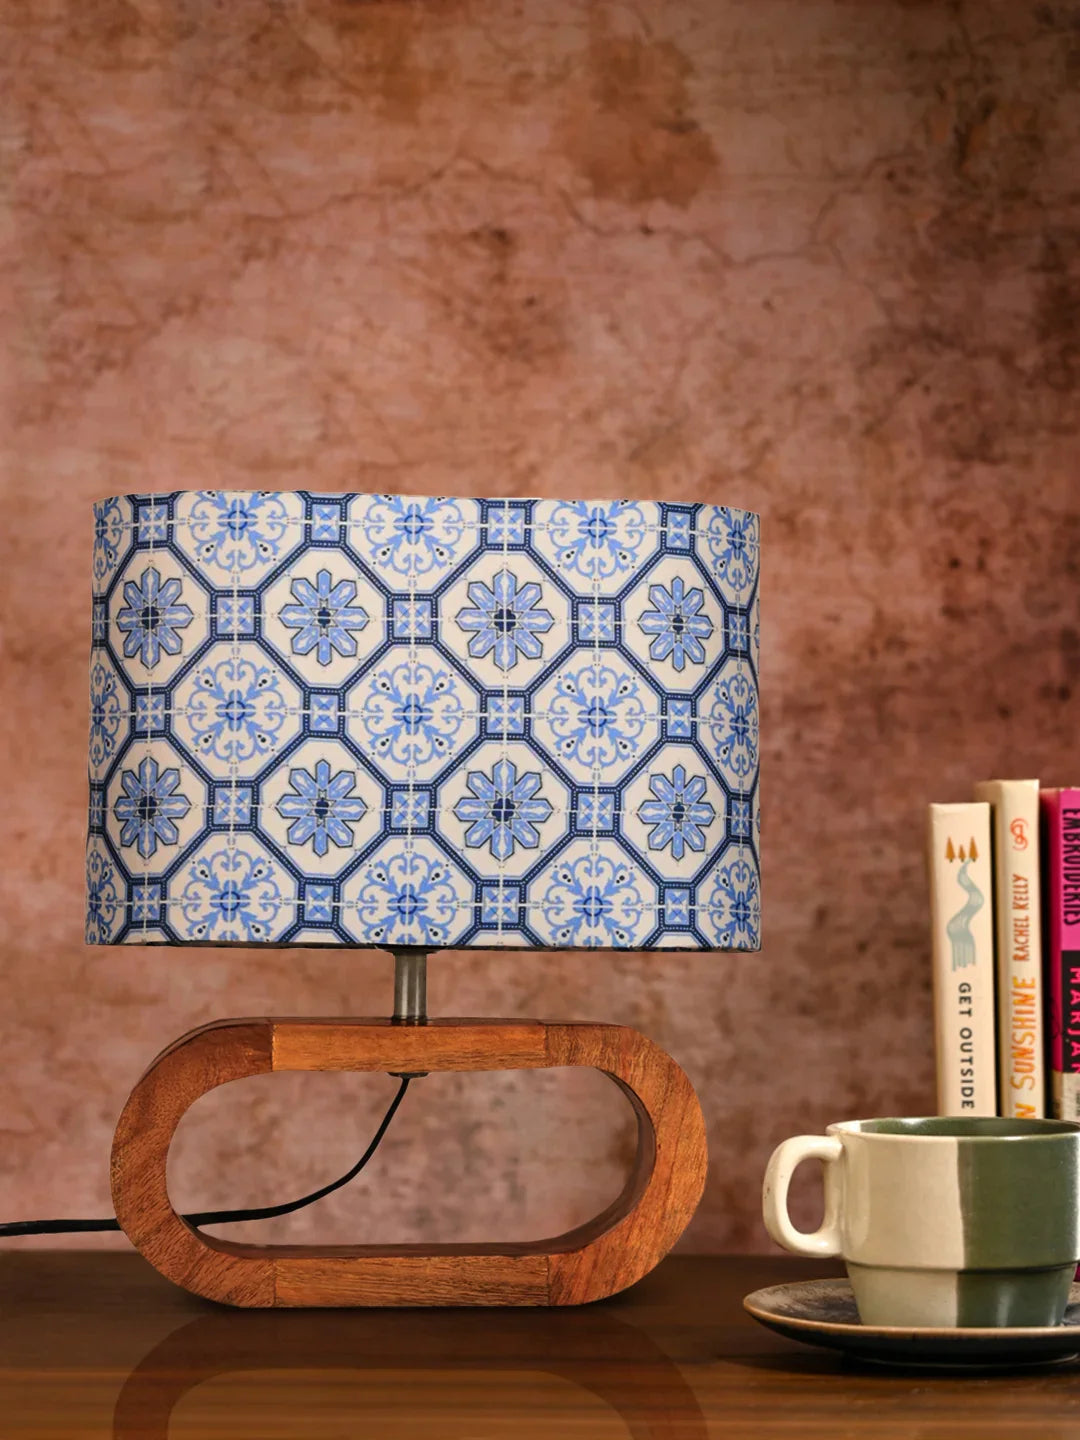 Wooden Oval Lamp with Morrocan Blue tile print shade